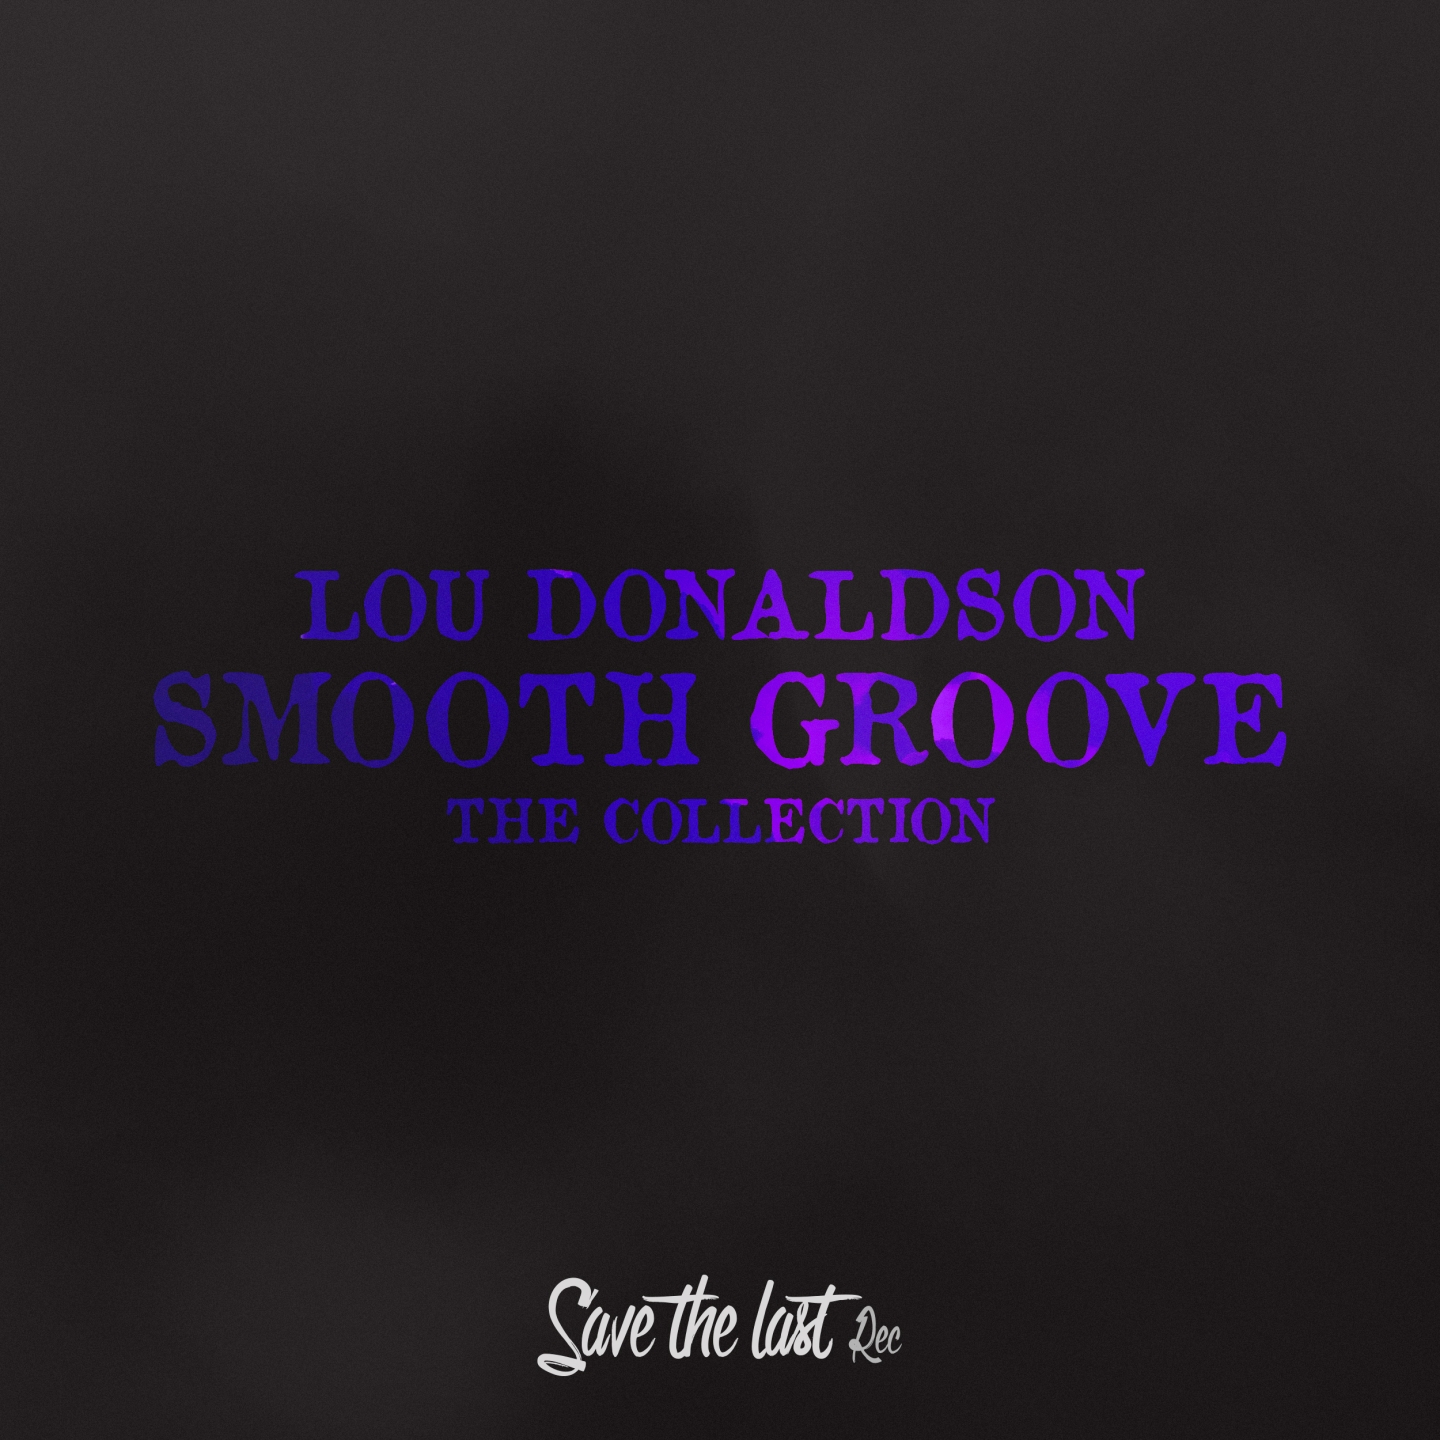 Smooth Groove (The Collection)